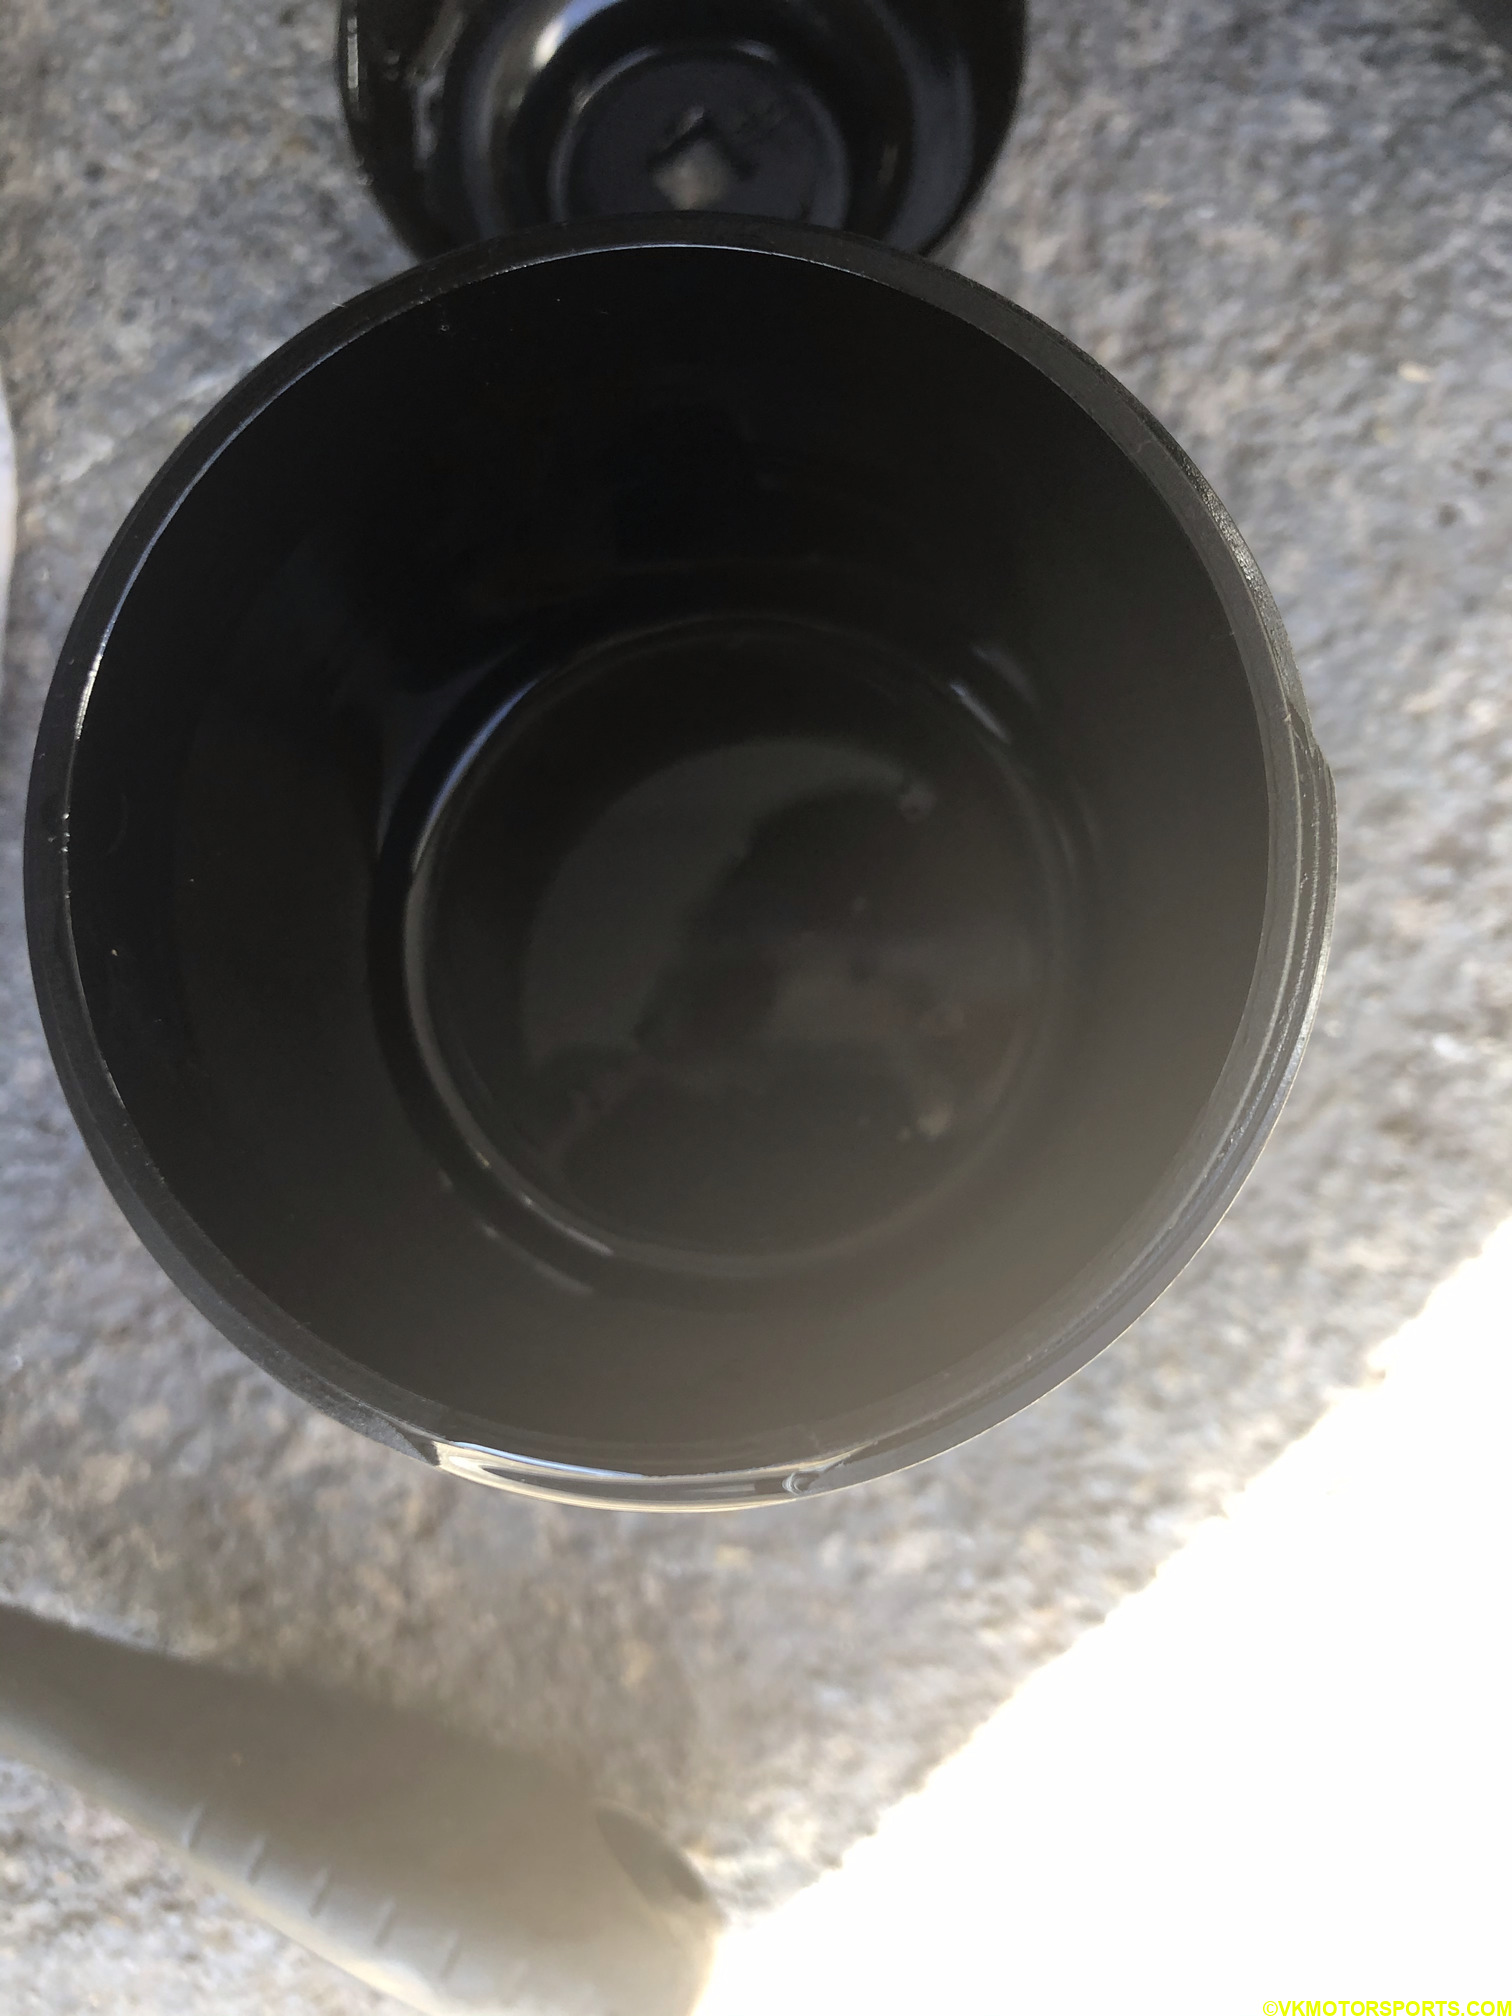 Figure 18. Fill half the filter housing with fresh oil